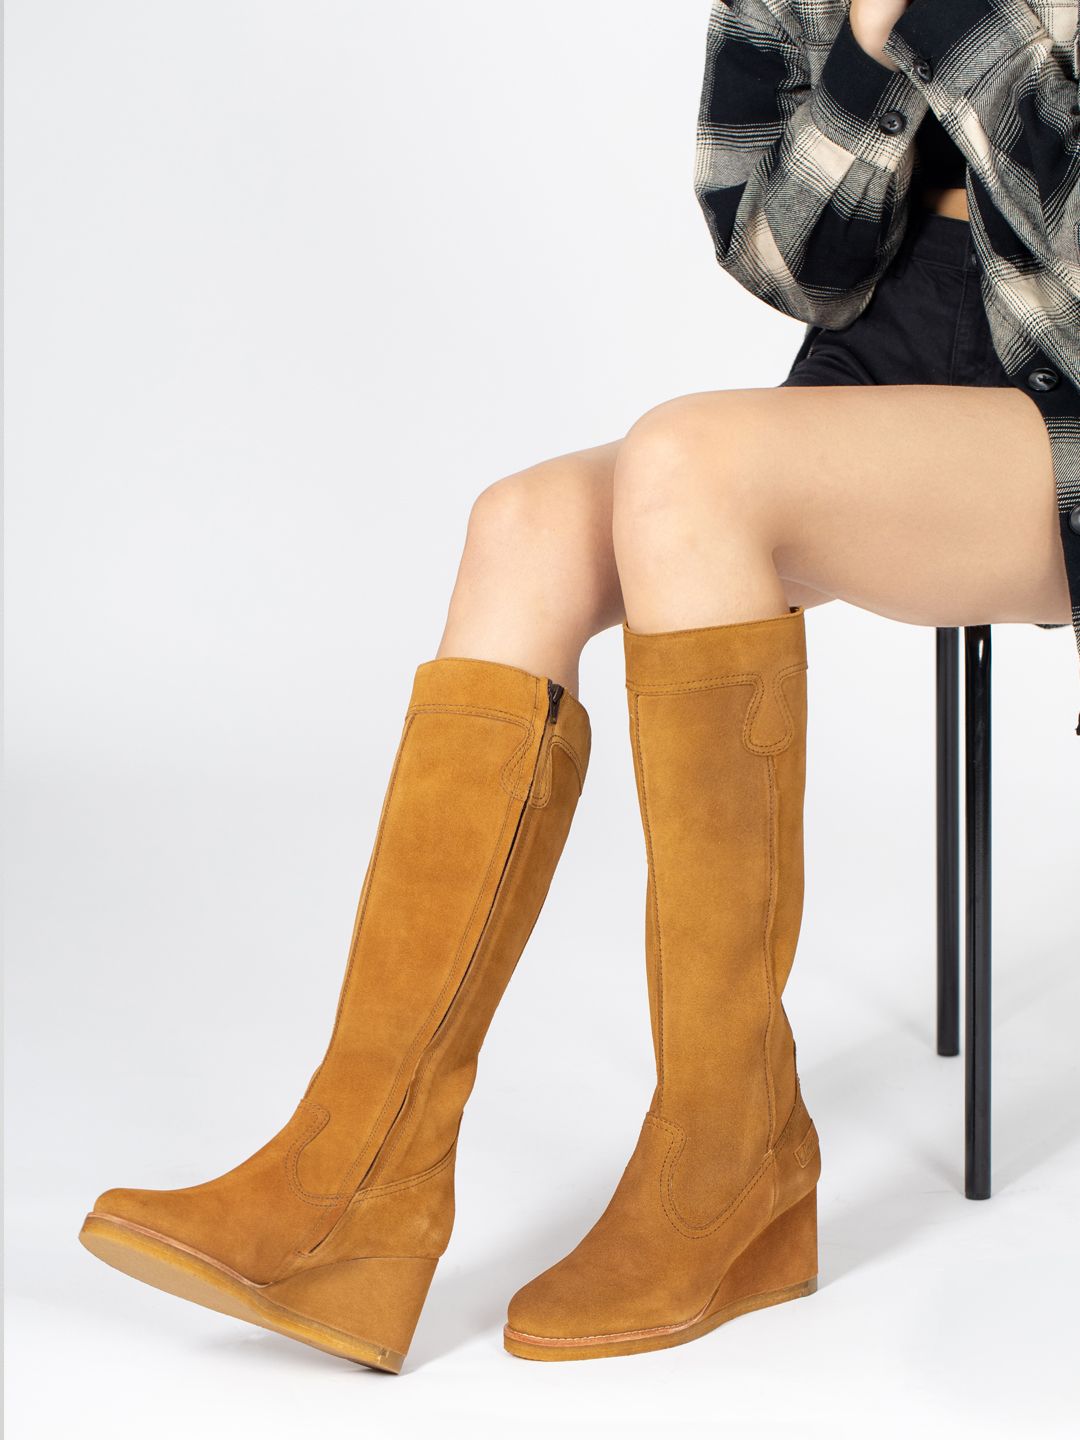 Saint G Tan Camel Brown Suede Leather Knee High Wedge Heel Boots Price in India